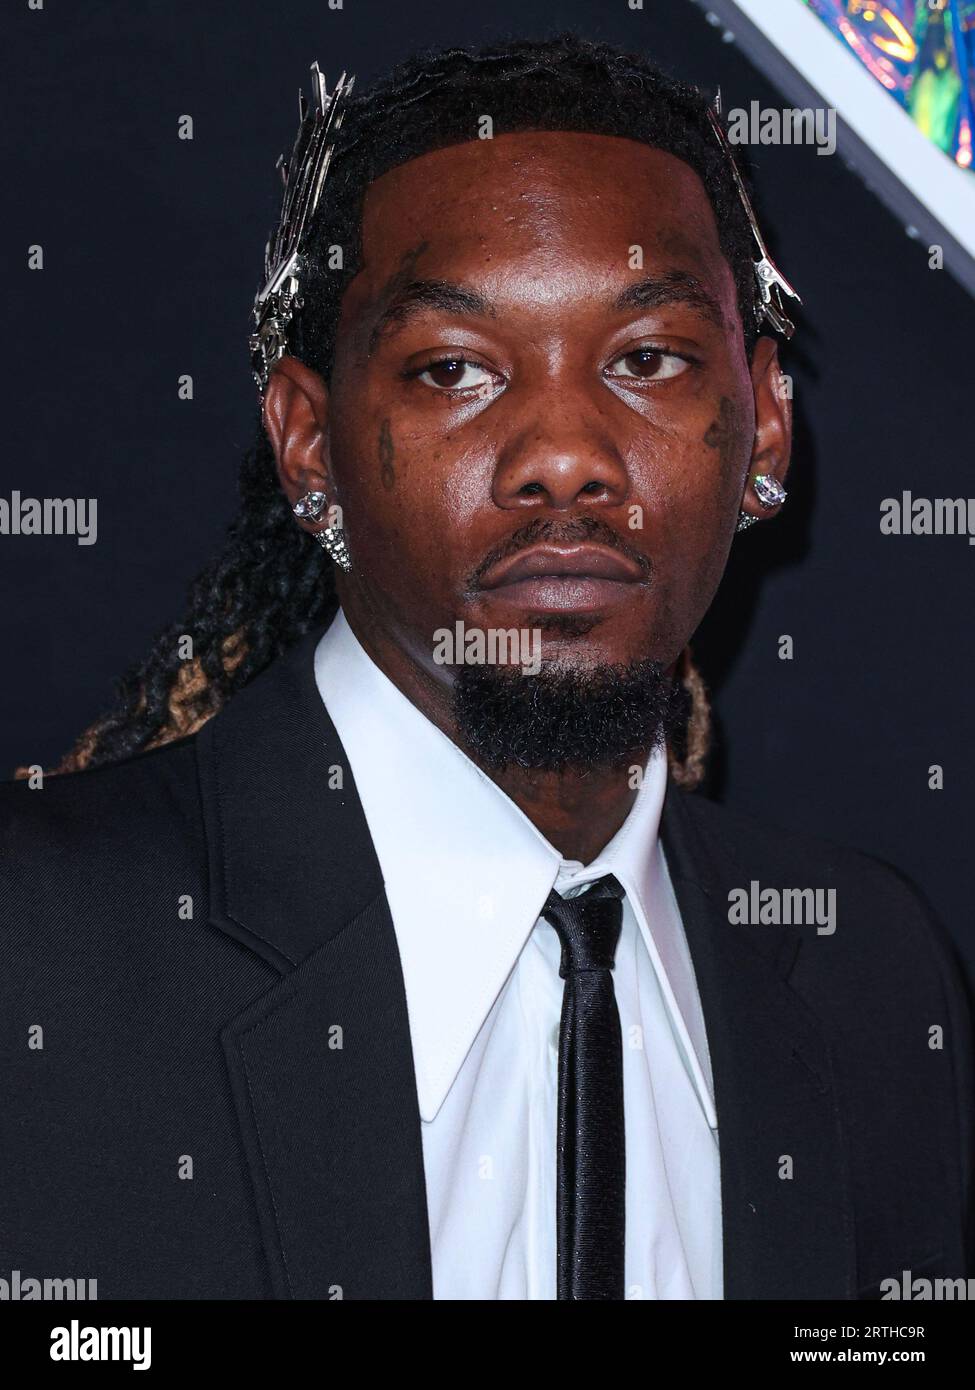 NEWARK, NEW JERSEY, USA - SEPTEMBER 12: Offset arrives at the 2023 MTV Video Music Awards held at the Prudential Center on September 12, 2023 in Newark, New Jersey, United States. (Photo by Xavier Collin/Image Press Agency) Stock Photo